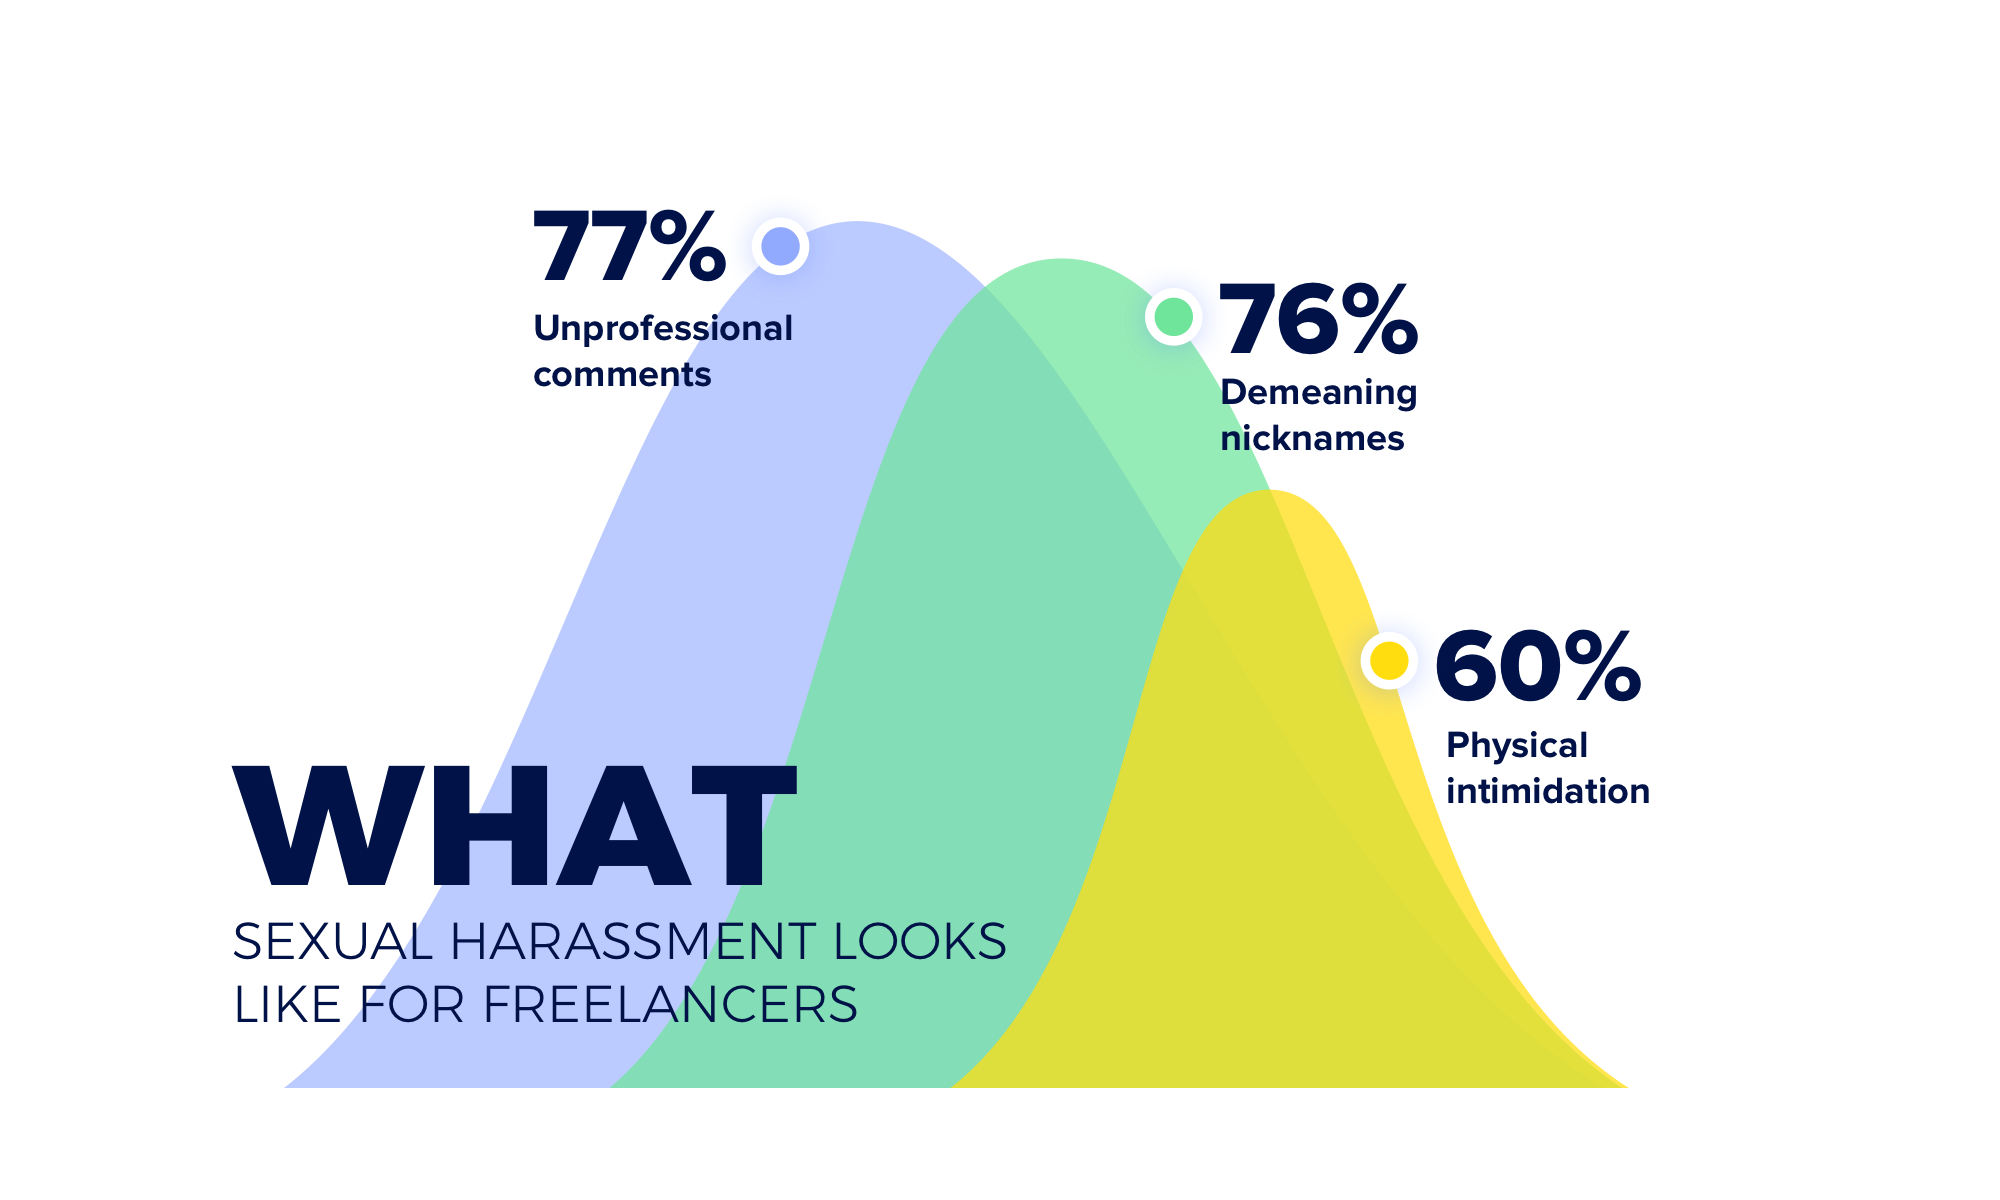 The nature of sexual harassment for freelancers and creative entrepreneurs varies:  77% experienced unprofessional comments on appearance, 76% have been called demeaning nicknames, and 60% have been the victims of physical intimidation